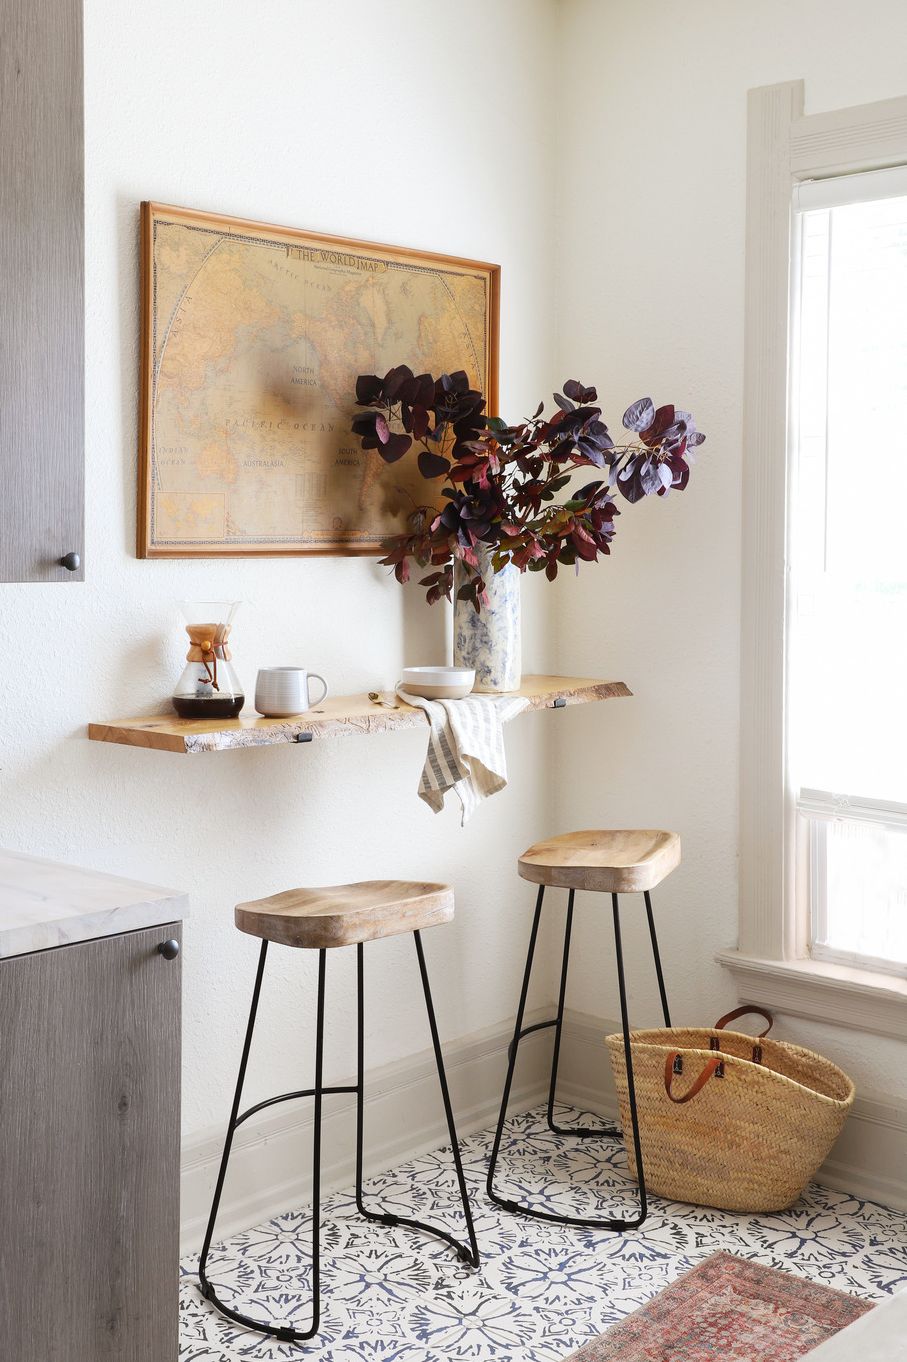 brunch nook, breakfast nook created with live edge wood and a diy floating shelf kit designed by jenni yolo of i spy diy